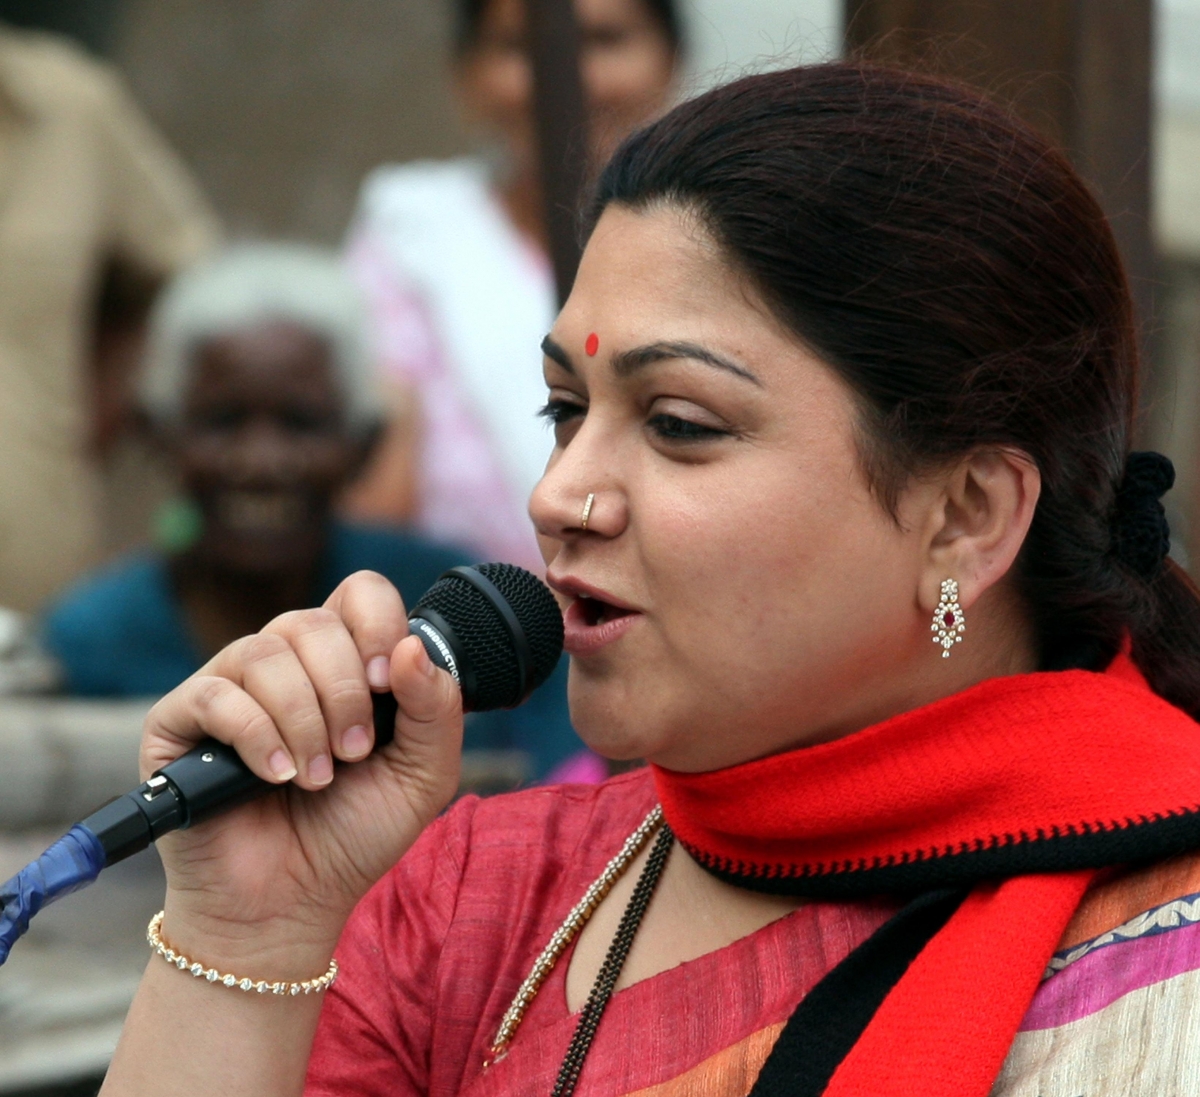 Navigate Kushboo Sex - Actress Khushboo, who Made Controversial Remarks on Pre-Marital Sex, Joins  Congress - IBTimes India